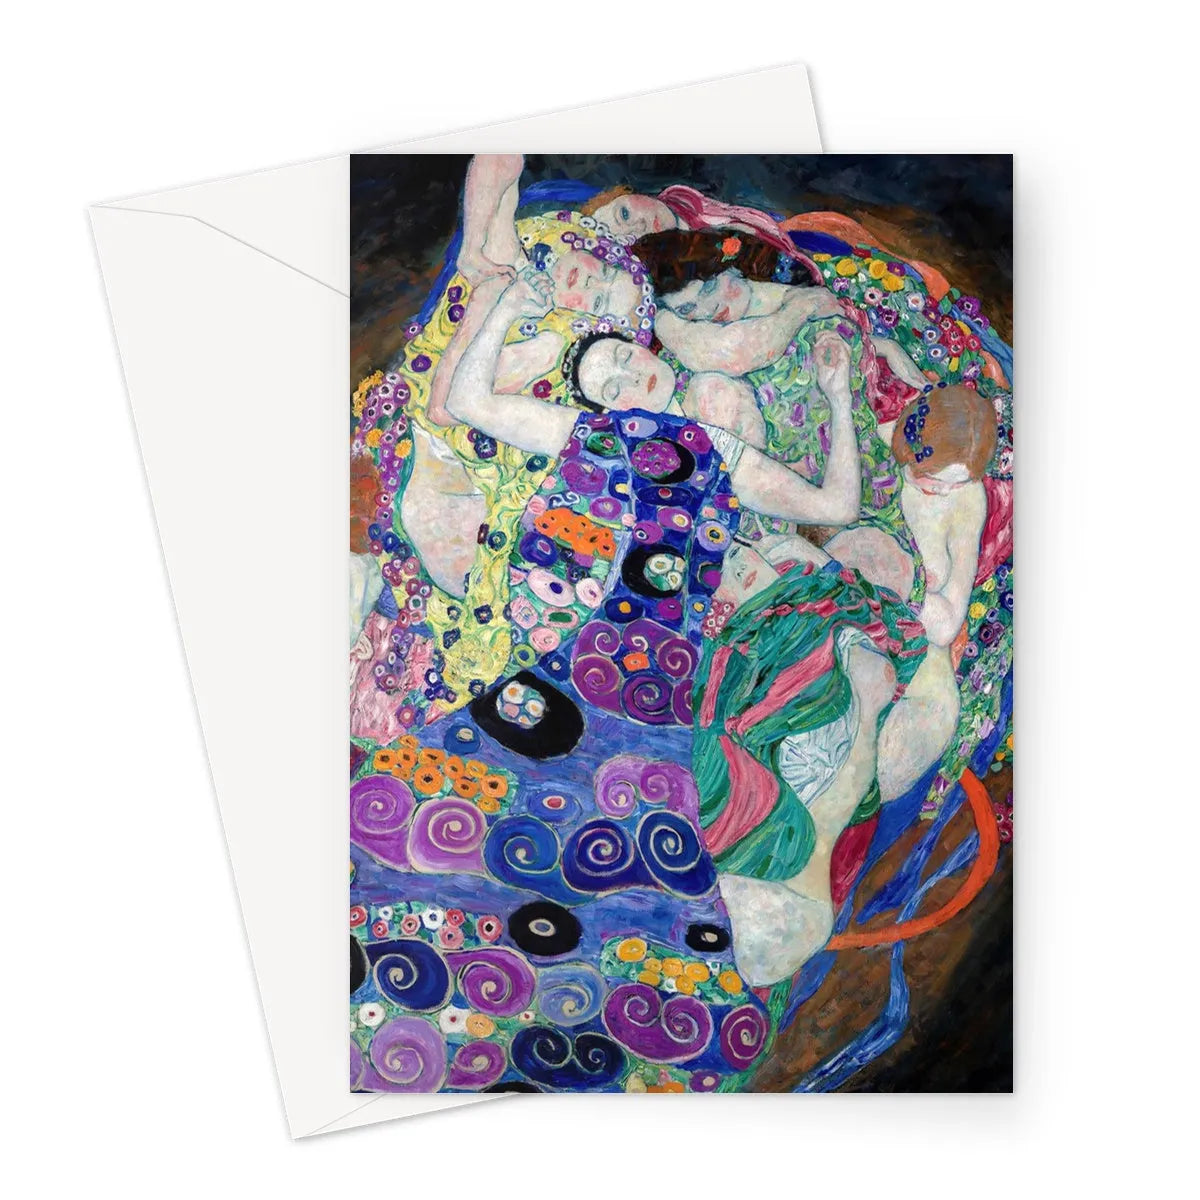 The Virgin By Gustav Klimt Greeting Card - A5 Portrait / 1 Card - Greeting & Note Cards - Aesthetic Art